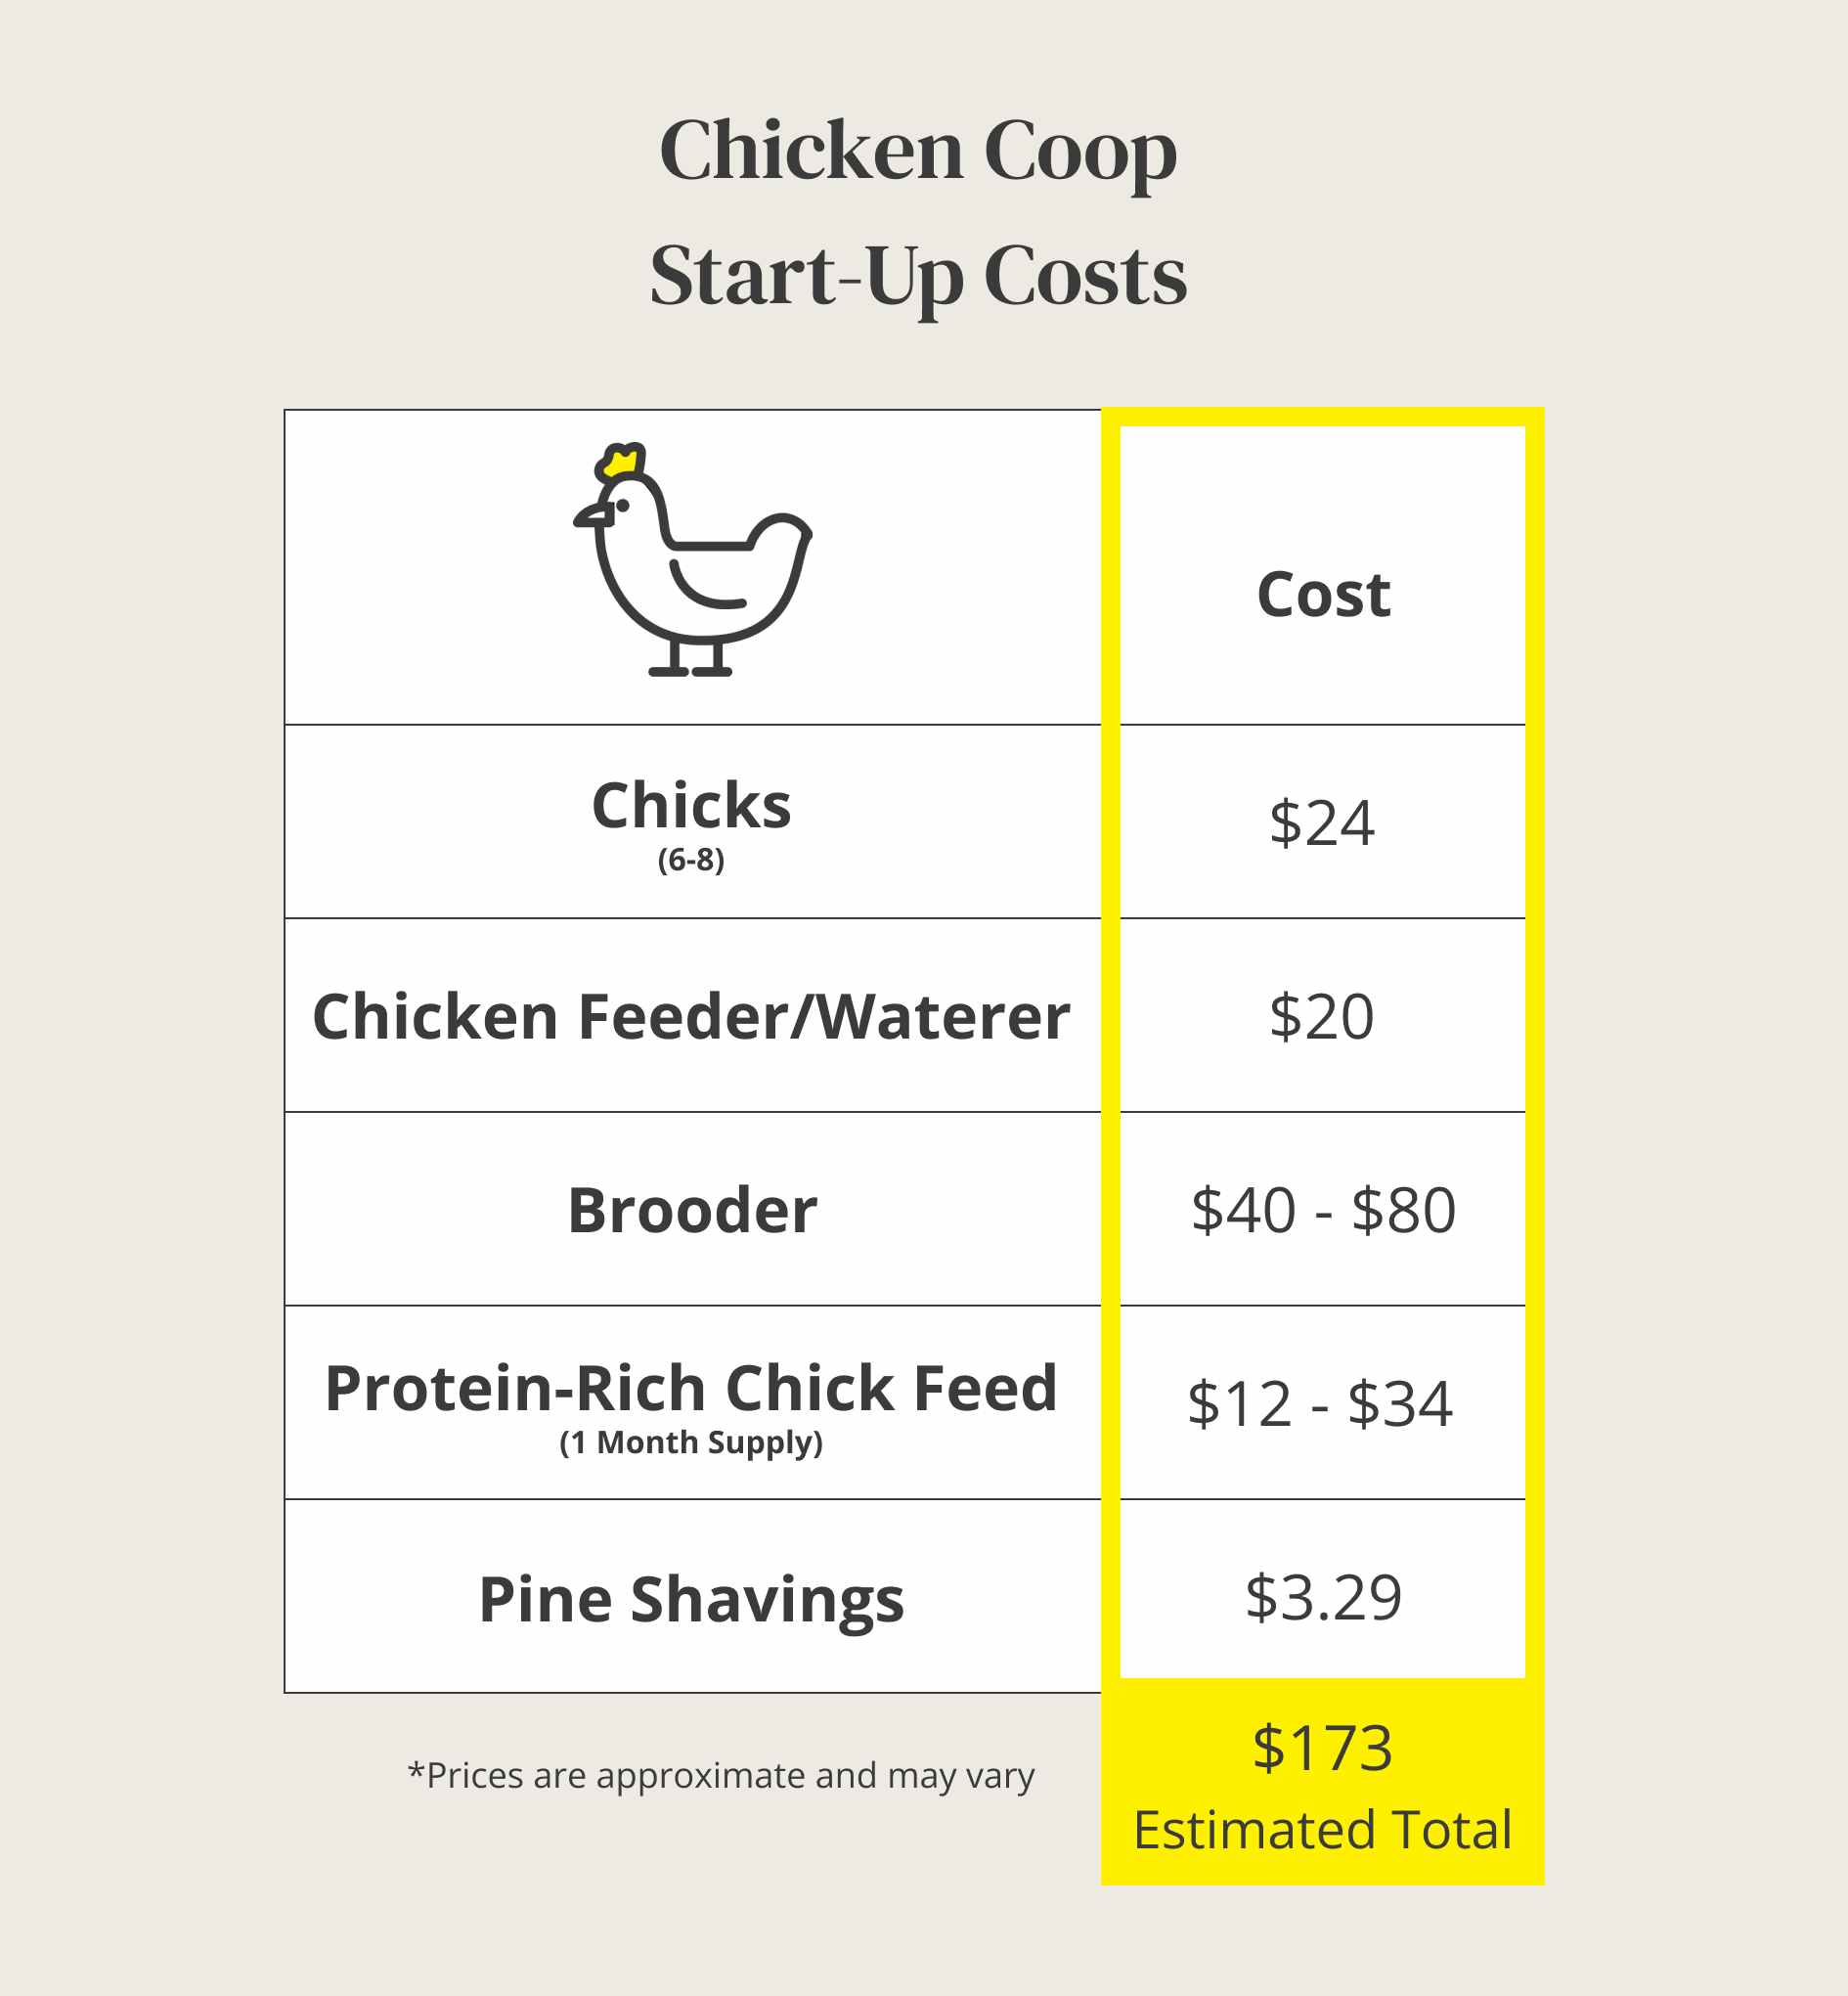 graphic showing the start-up costs for building a chicken coop